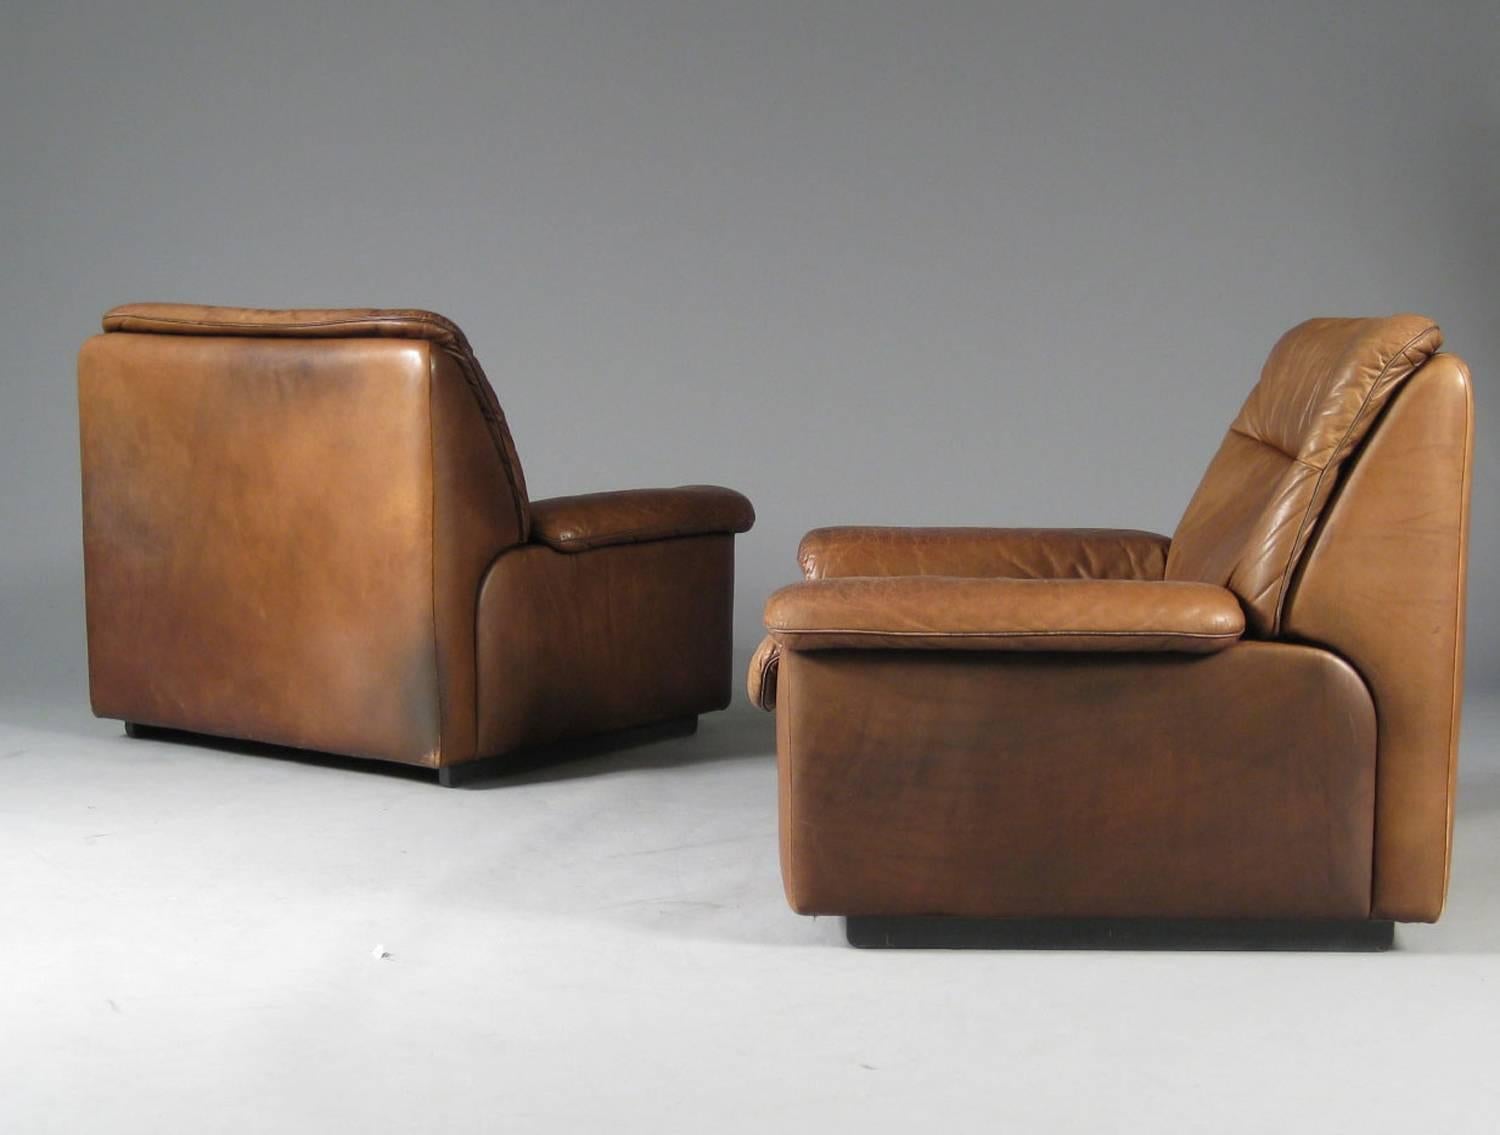 Pair of 1970s leather club chairs and ottoman by luxury furniture maker De Sede of Switzerland. Very comfortable luxuriously
Sized chairs.